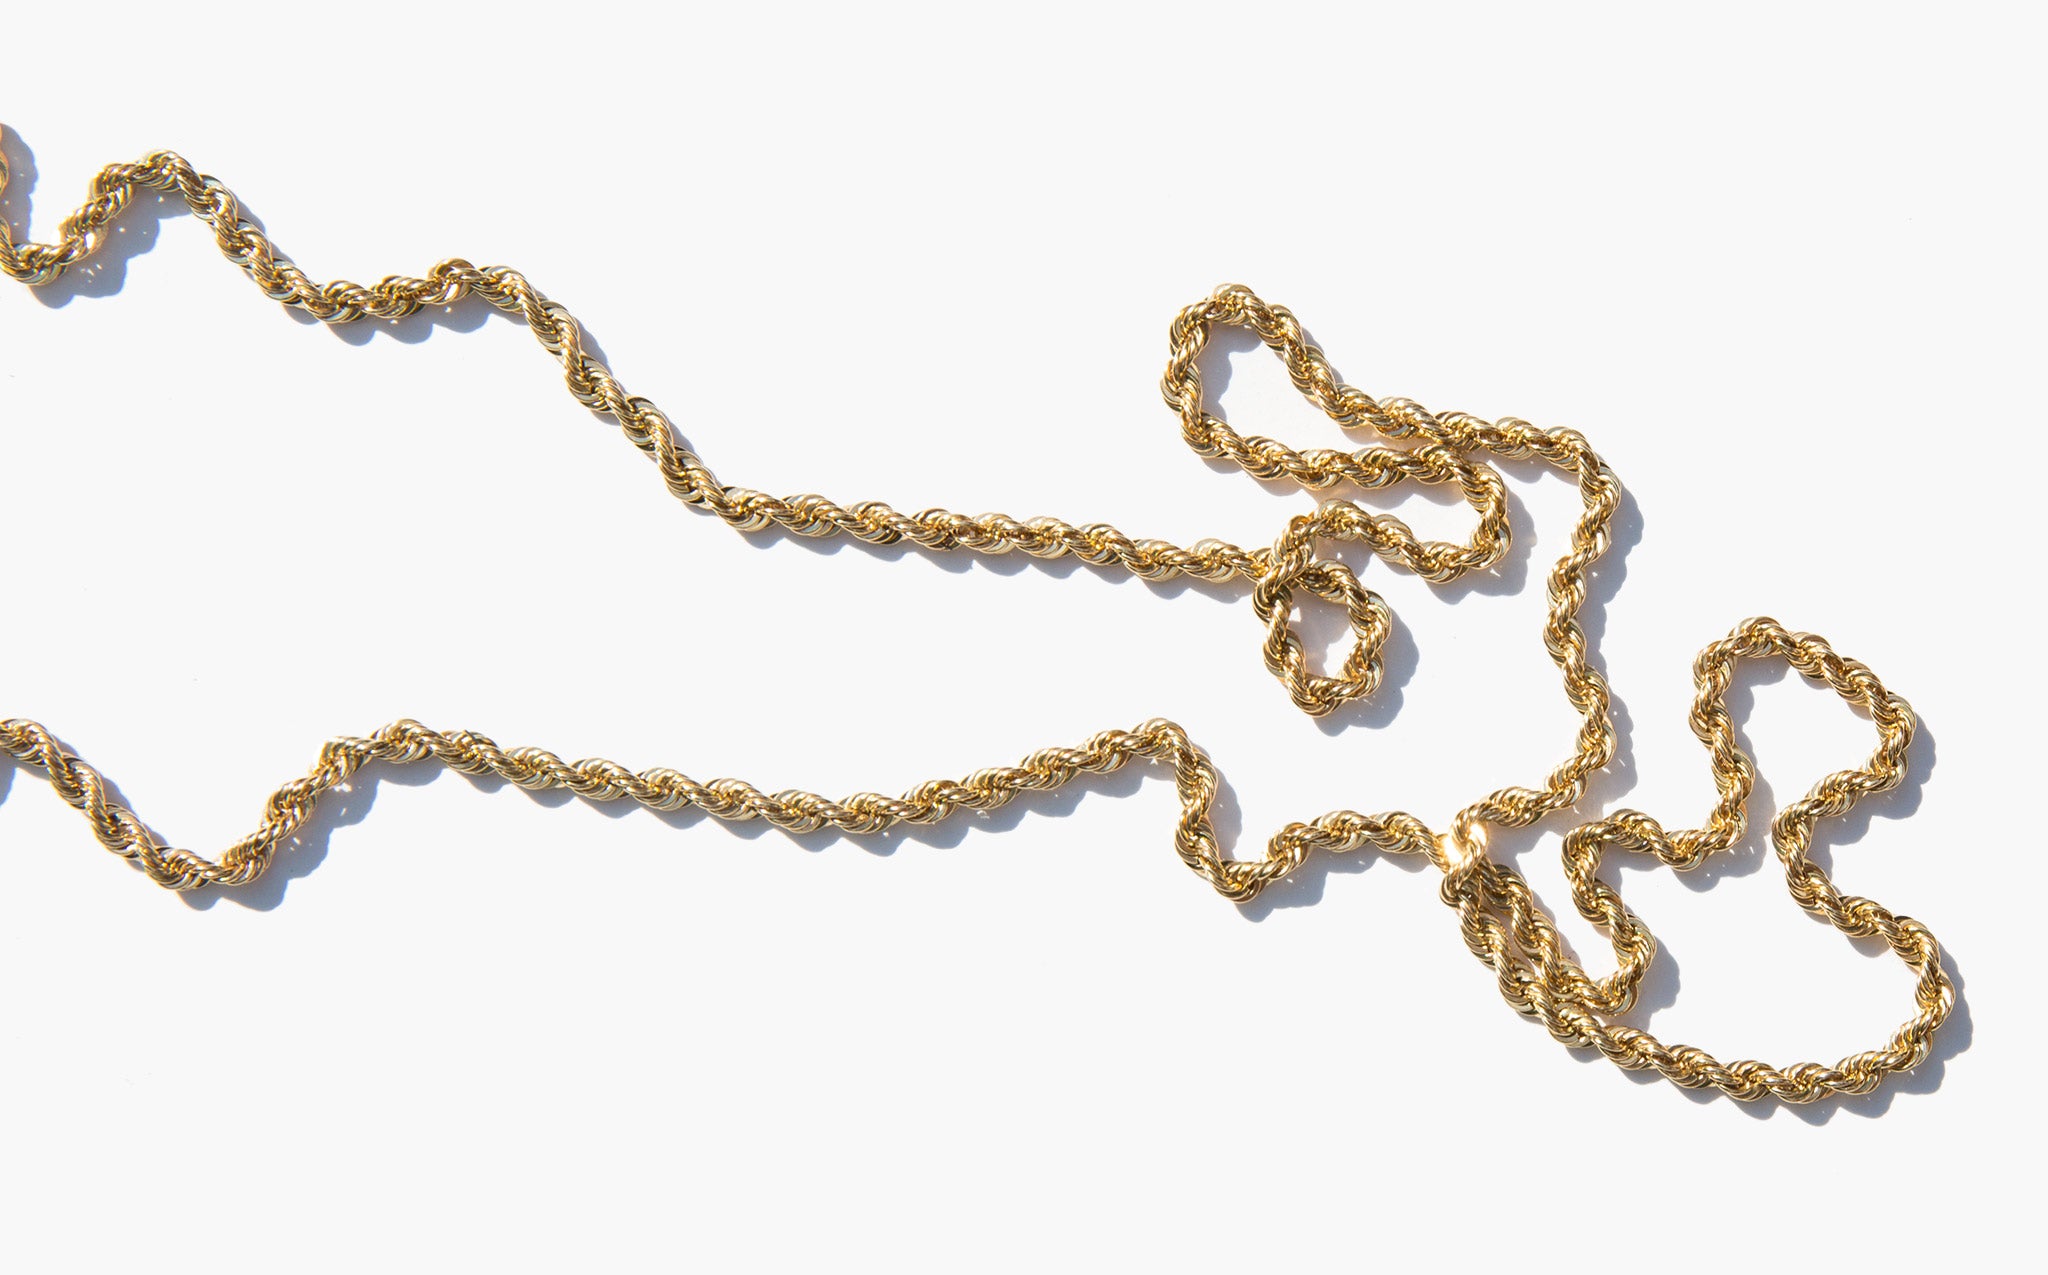 Langtry Chain